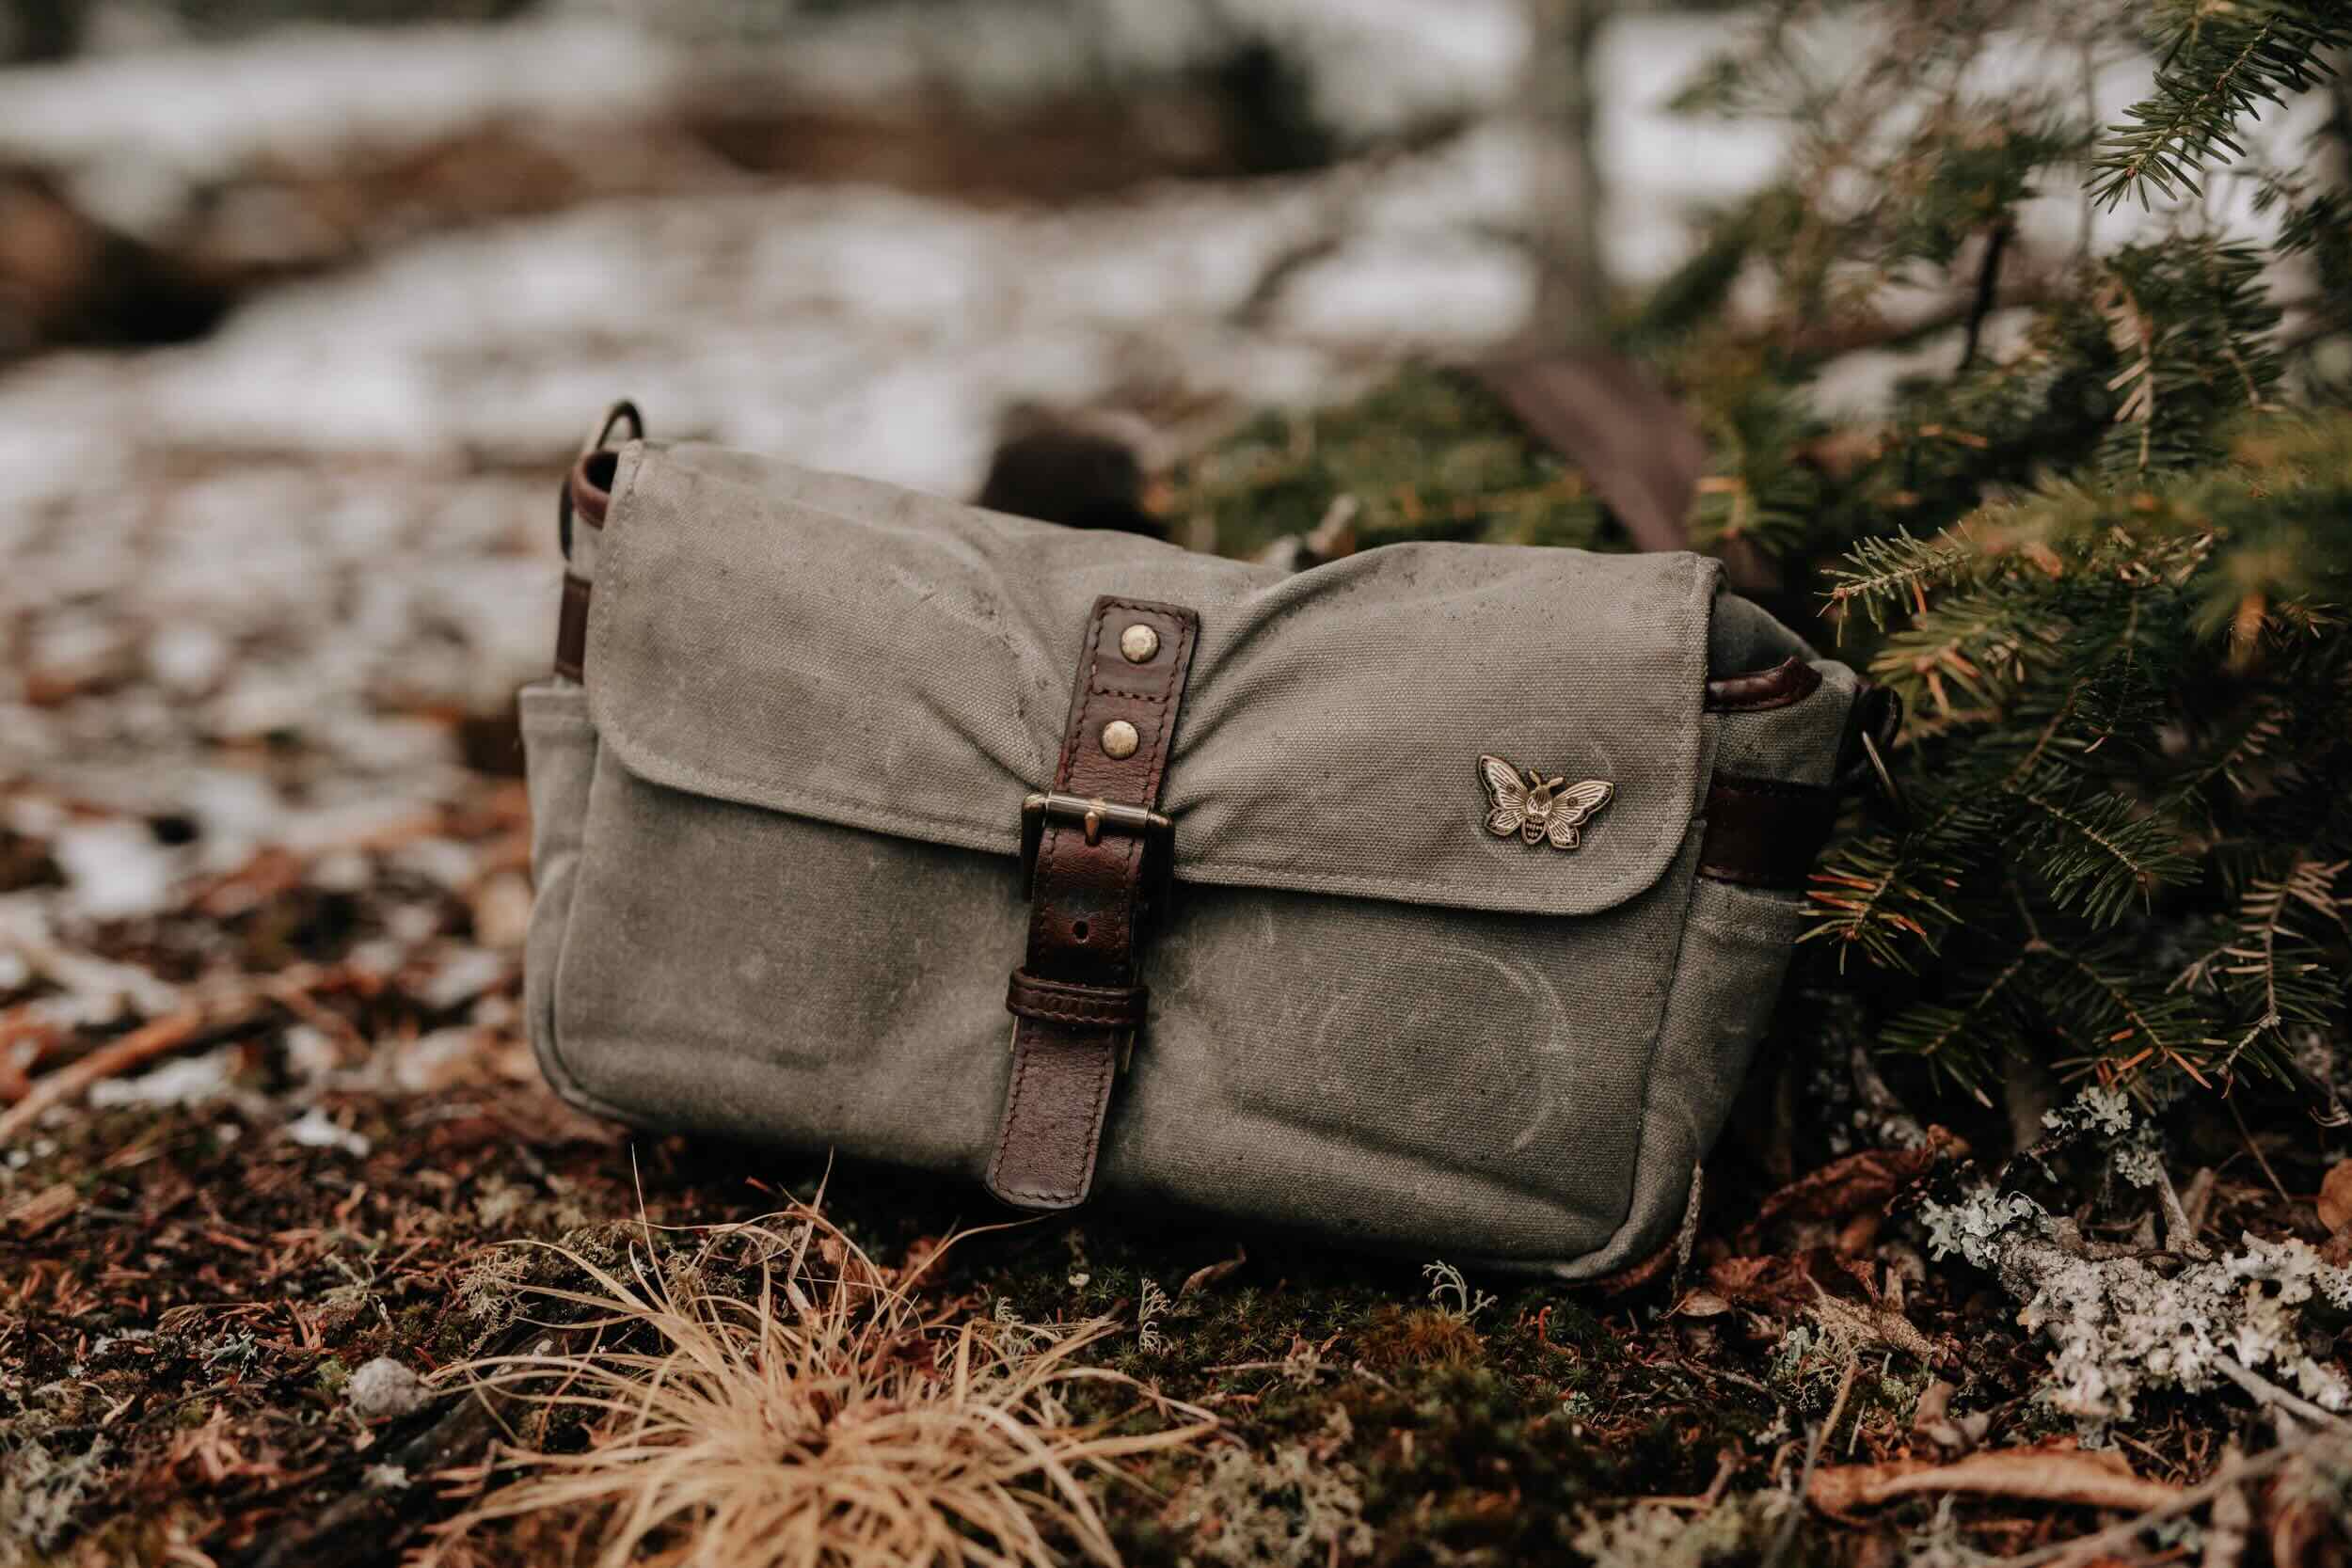 Camera Bag Review: Find the Perfect Bag for Your Photography Gear